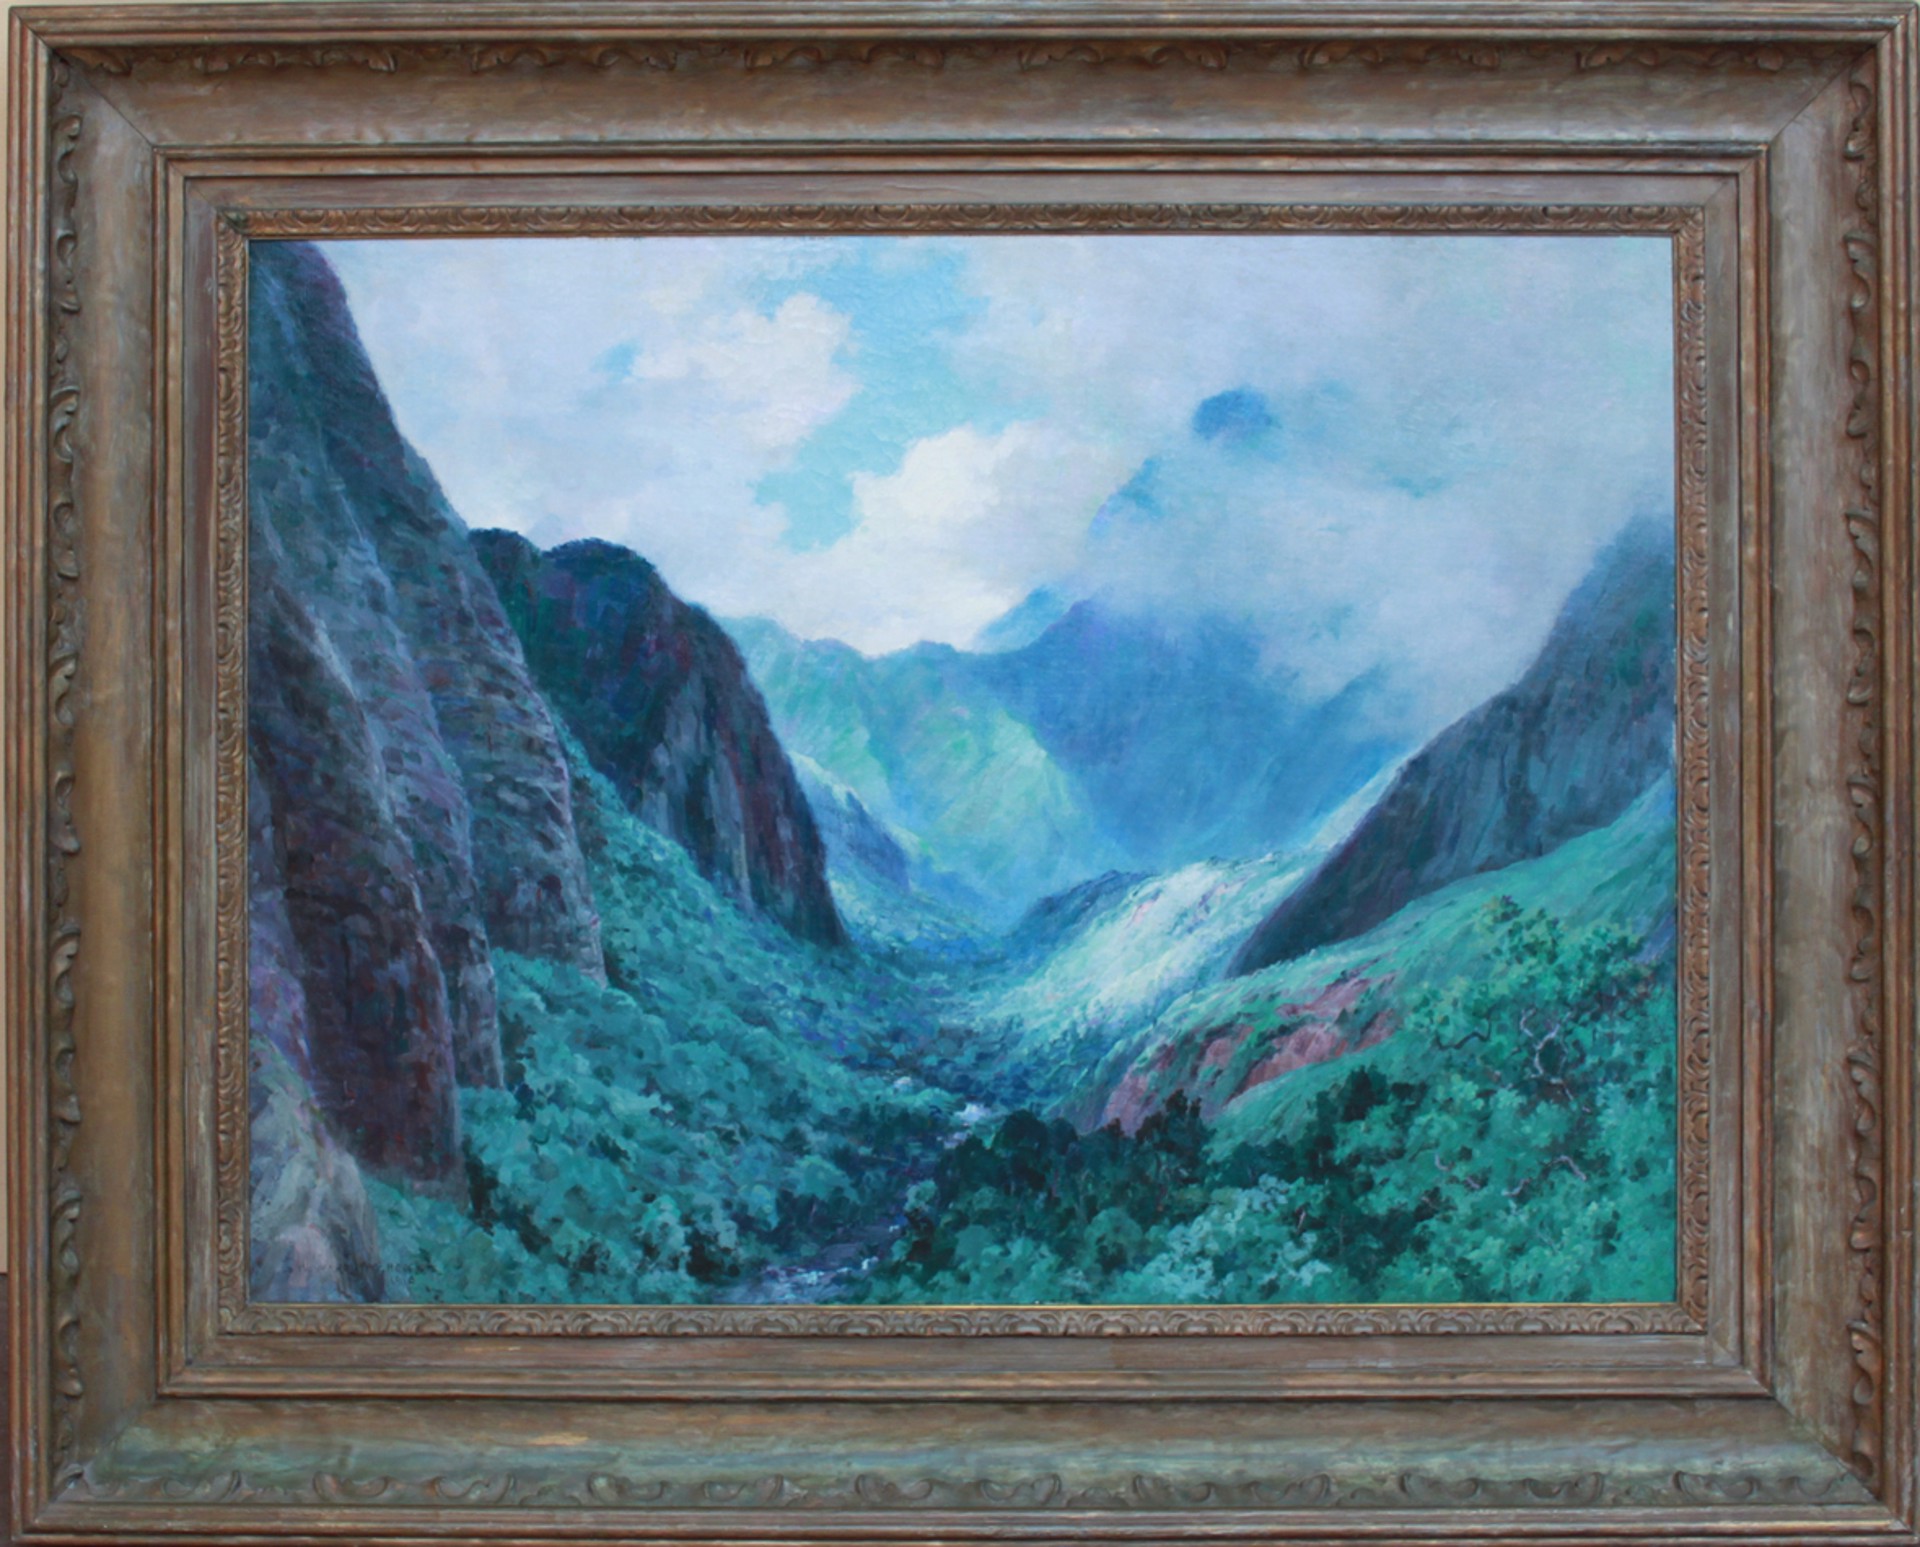 Iao Valley, Maui by D. Howard Hitchcock